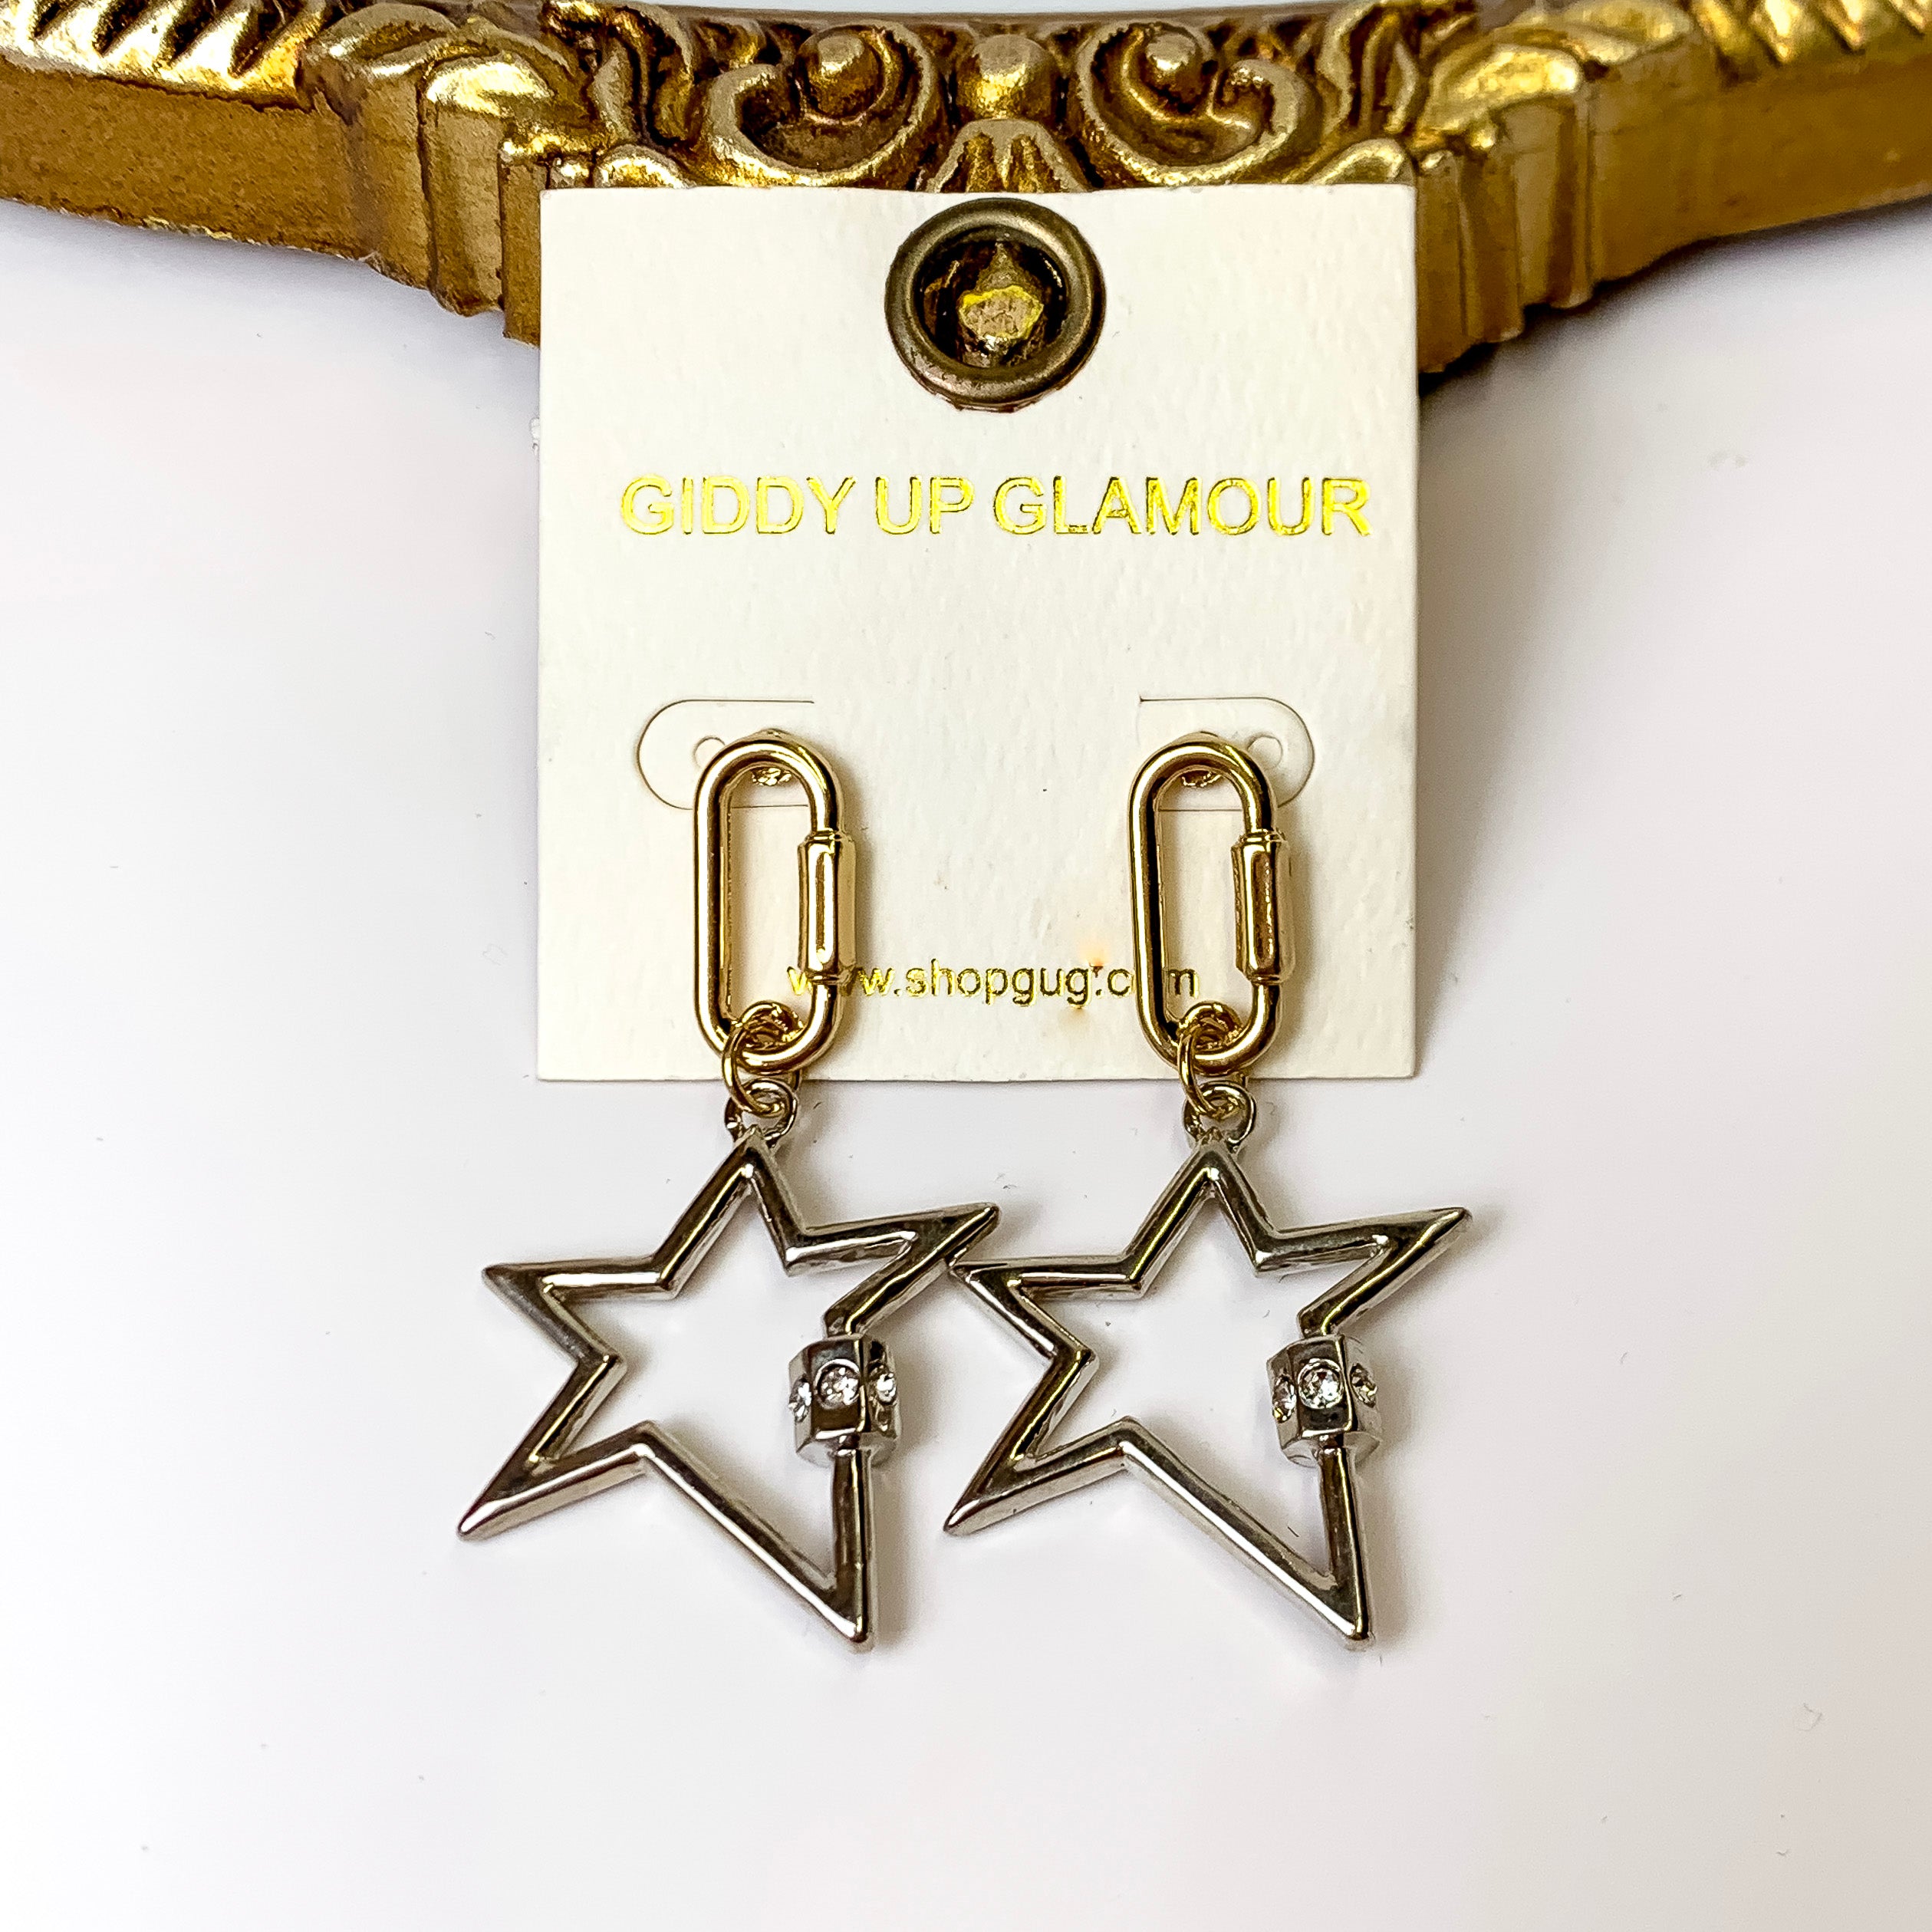 Catching Stars Star Dangle Earrings with Crystal Accents in Silver - Giddy Up Glamour Boutique